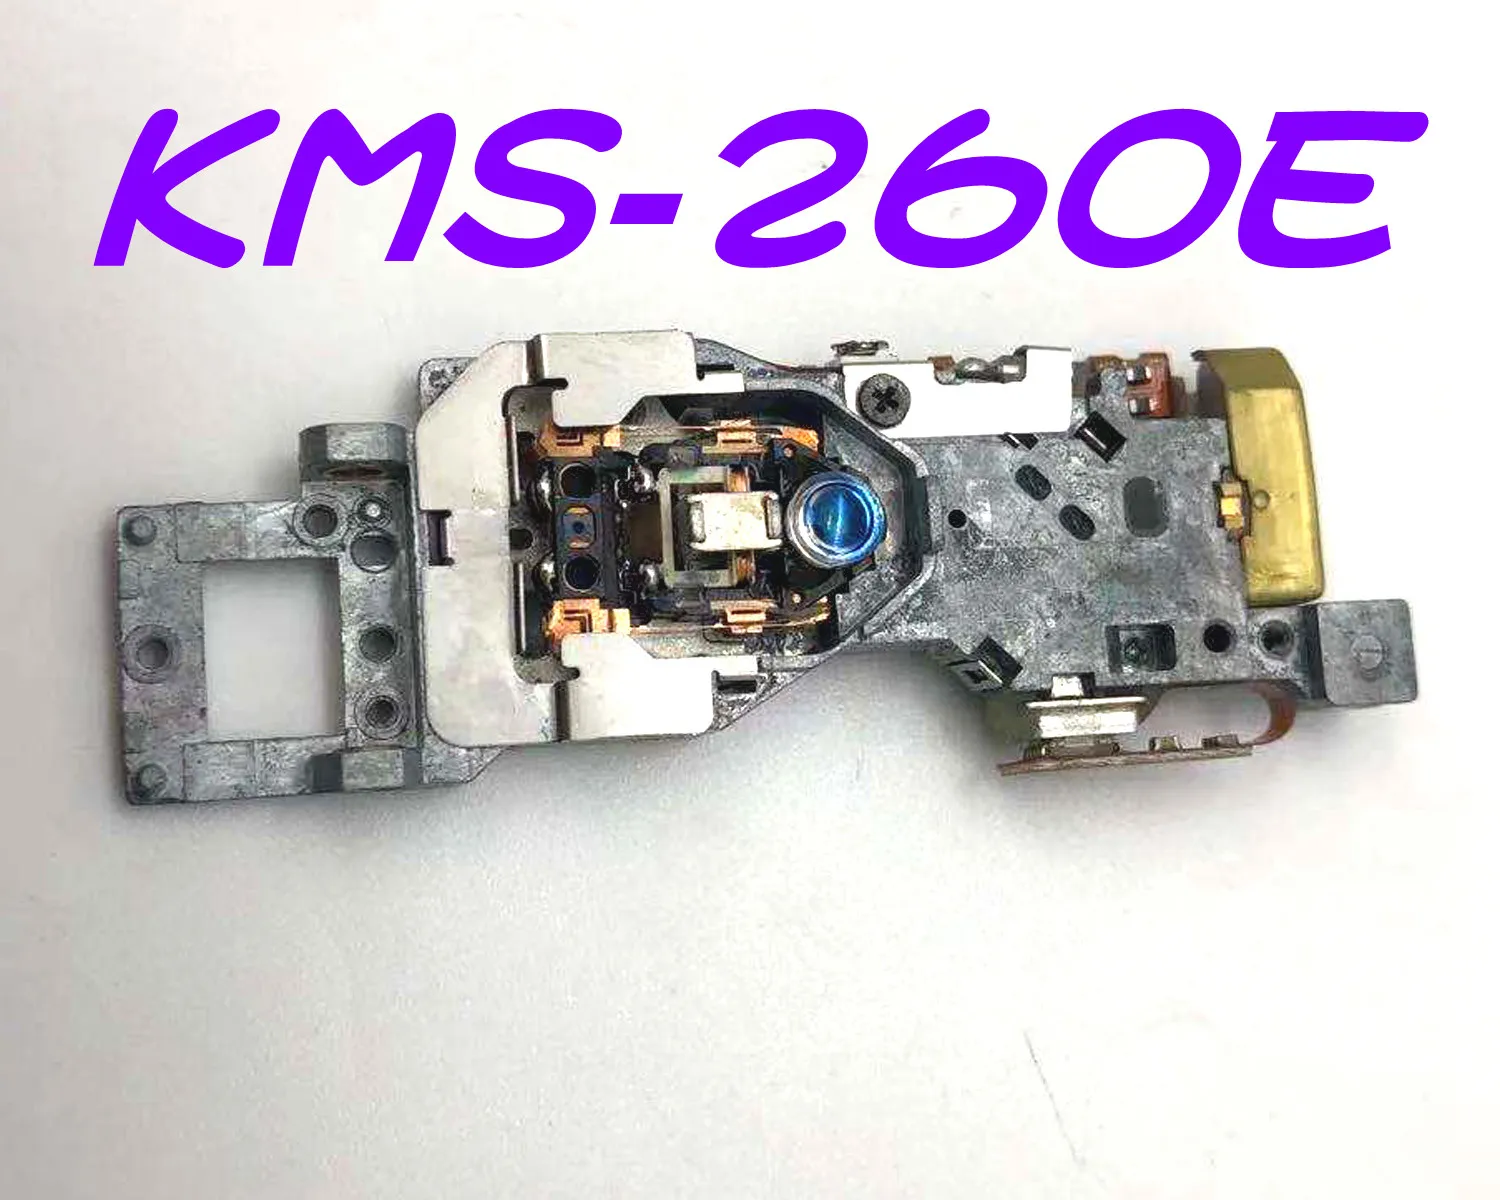 

Original New KMS-260E MD260 KMS 260 MD Lasereinheit Optical Pickup KMK260 MD-19 Bloc Optique Can Replace For KMS-260A